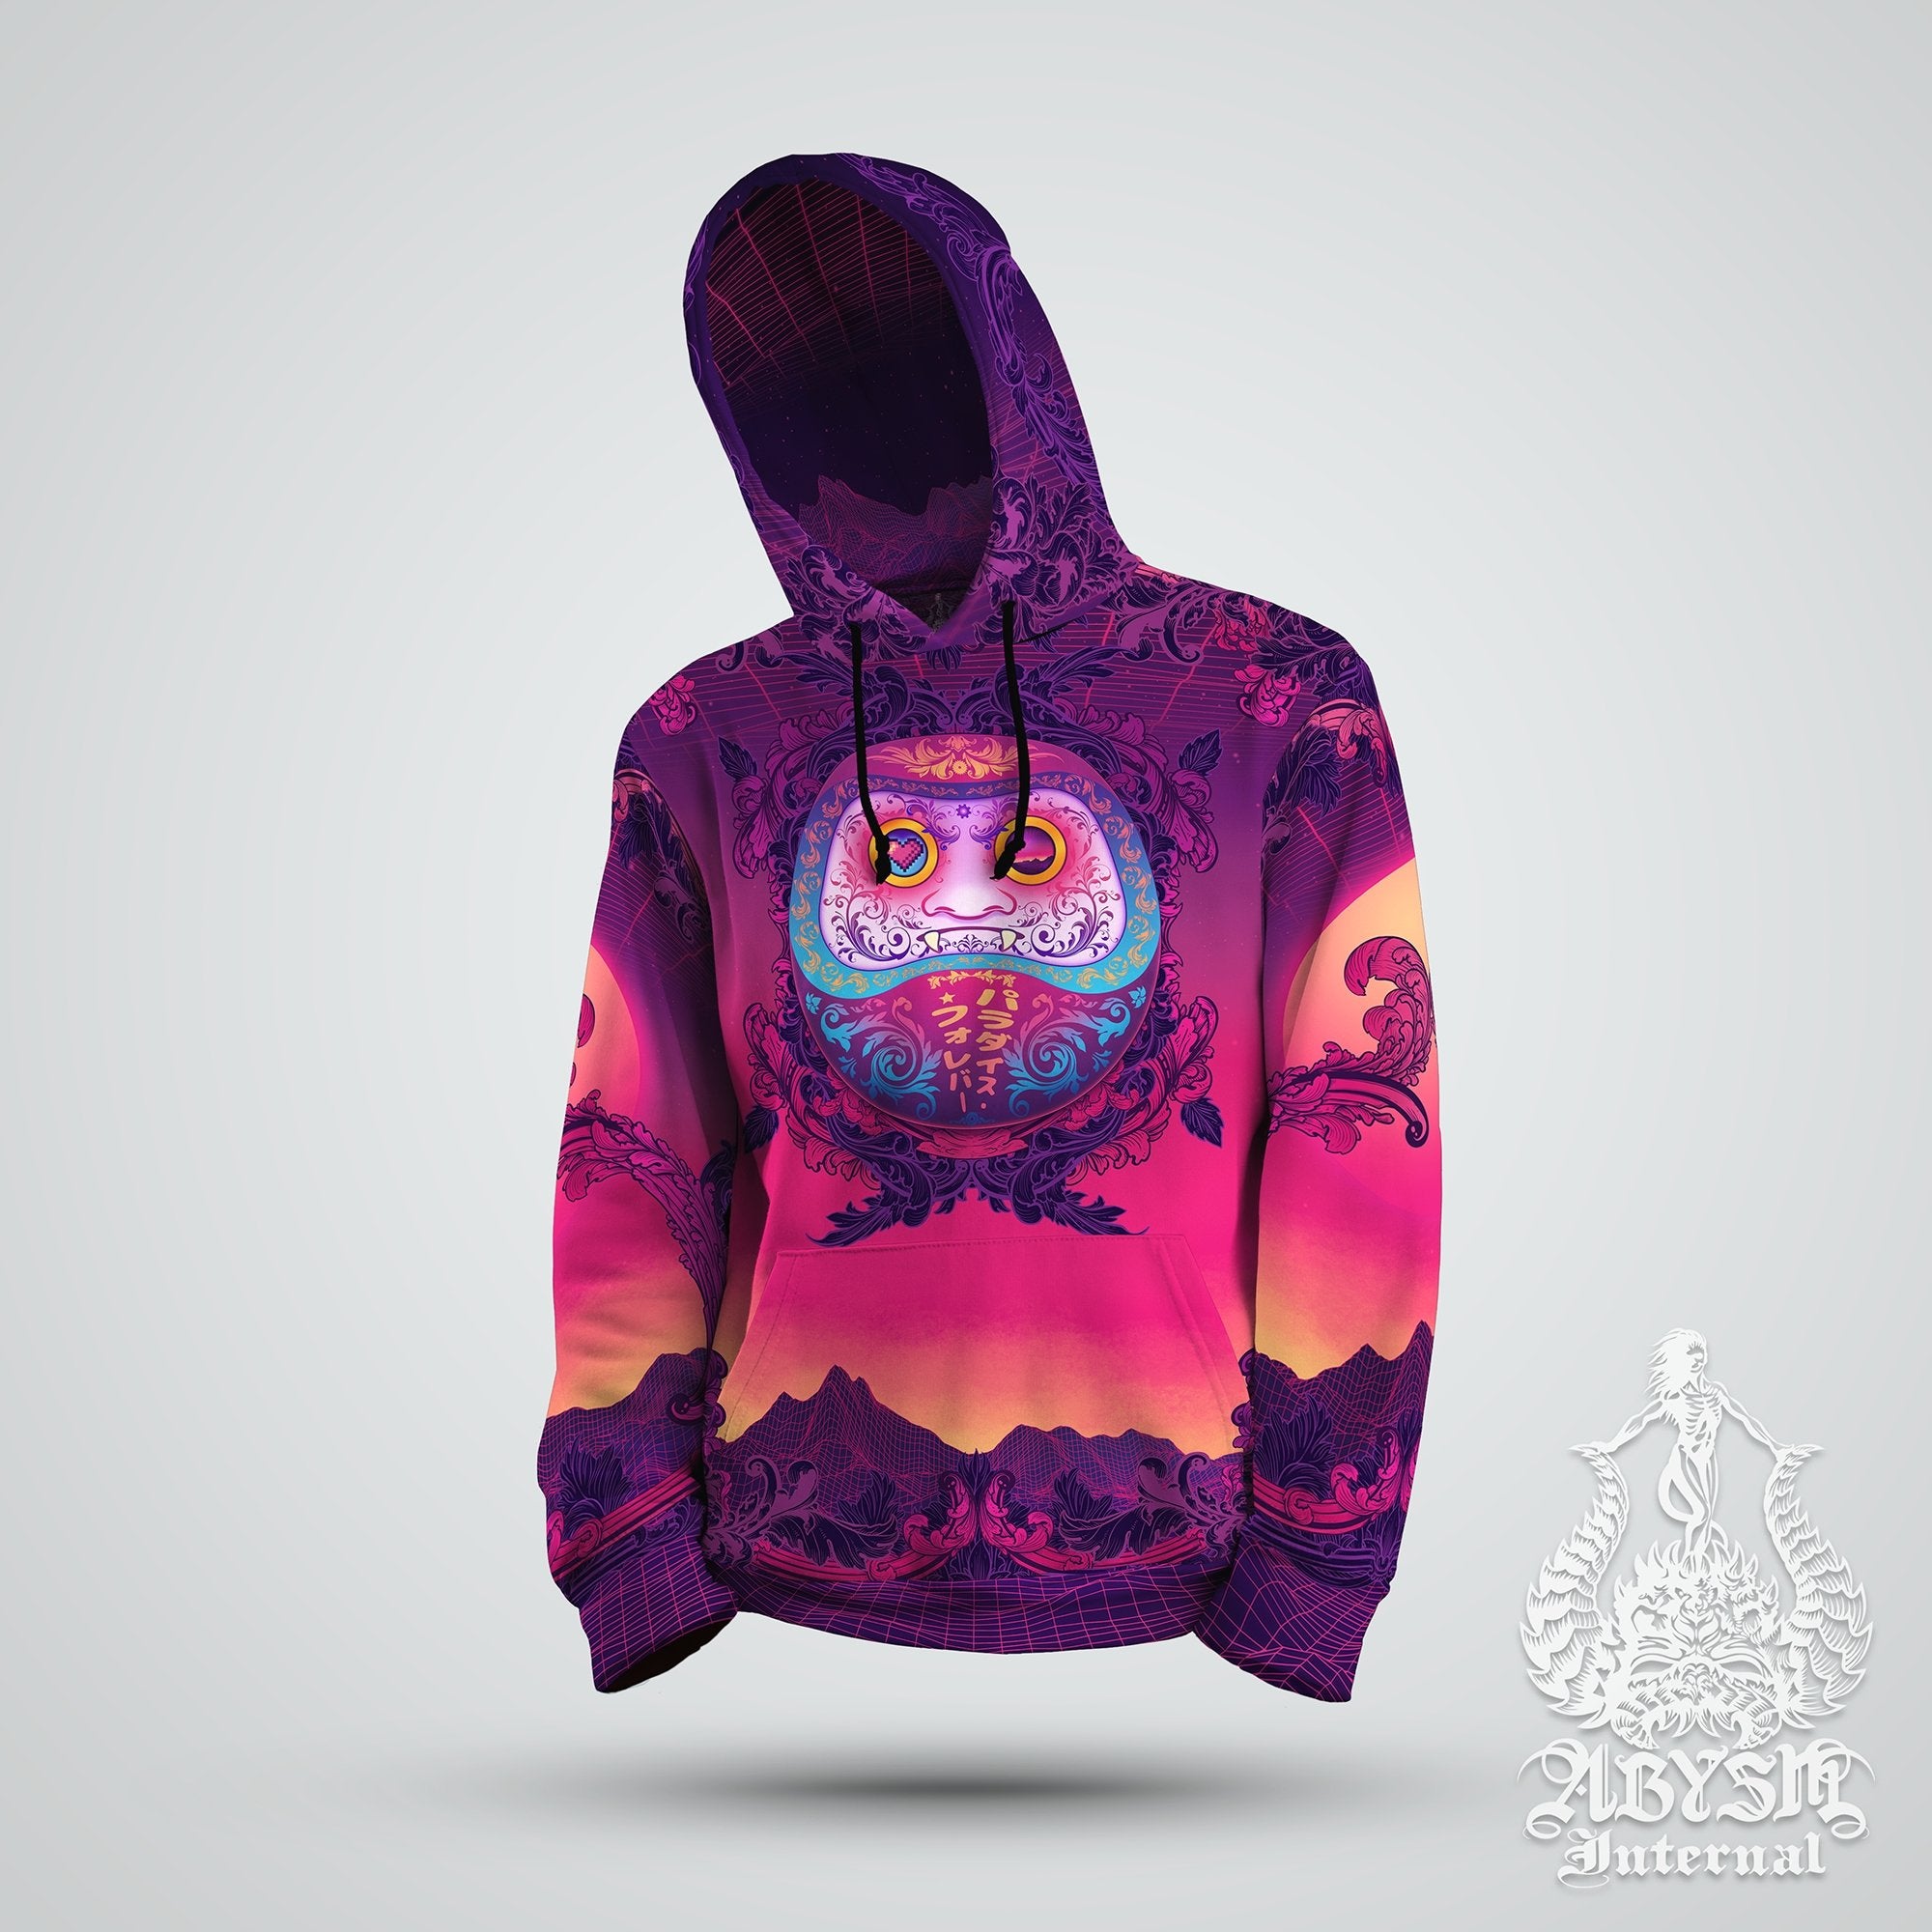 Japanese Vaporwave Hoodie, Trippy Outfit, Psychedelic Streetwear, Synthwave  Festival Pullover, Unisex Gift for Gamers, Anime, Manga - Retrowave Daruma